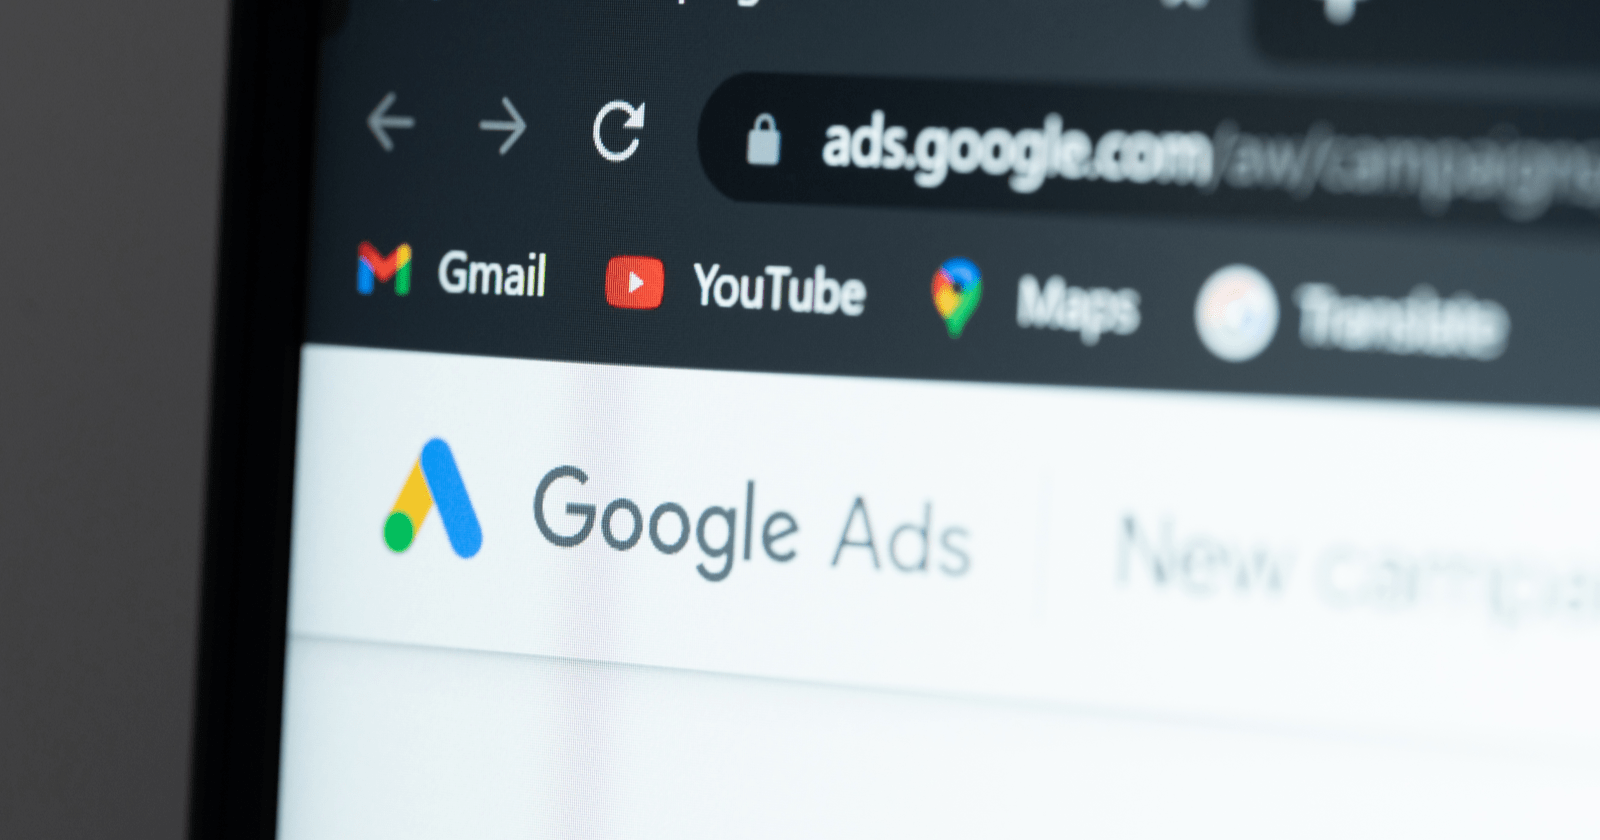 Google Ads launches diagnostic insights